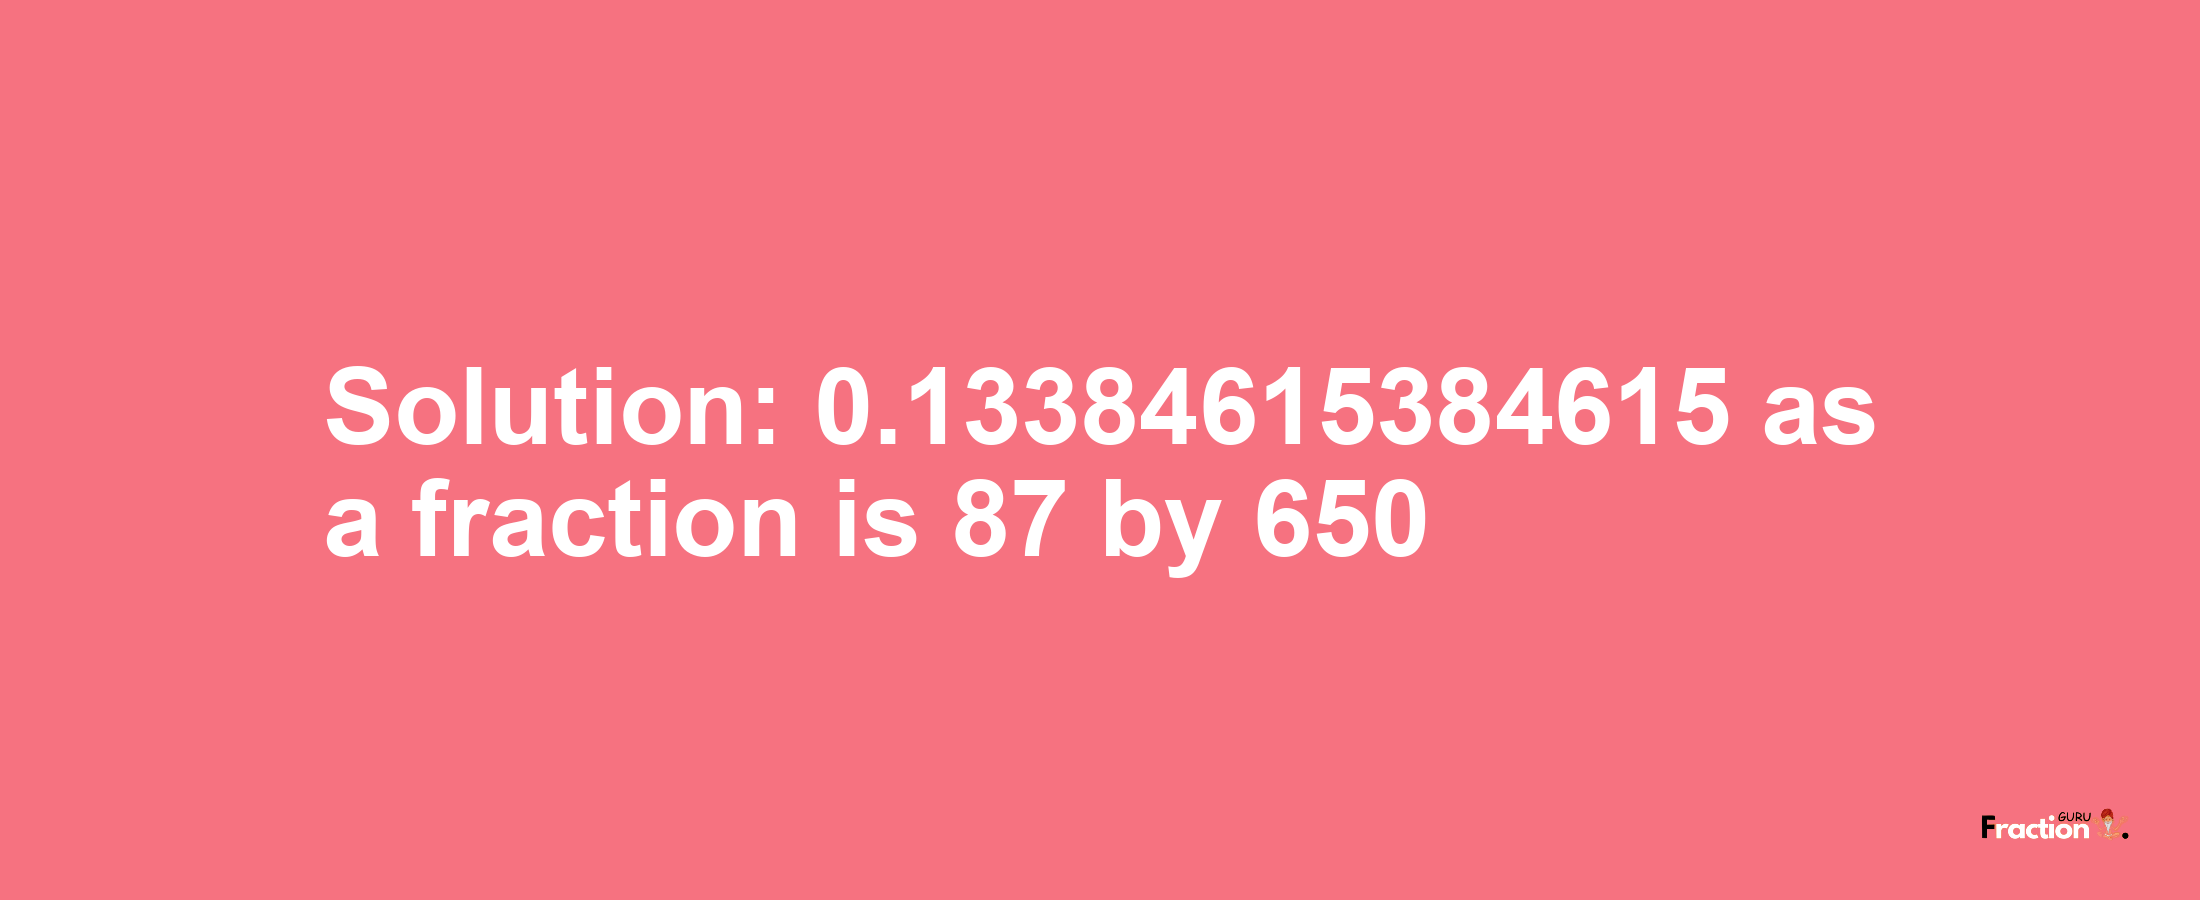 Solution:0.13384615384615 as a fraction is 87/650